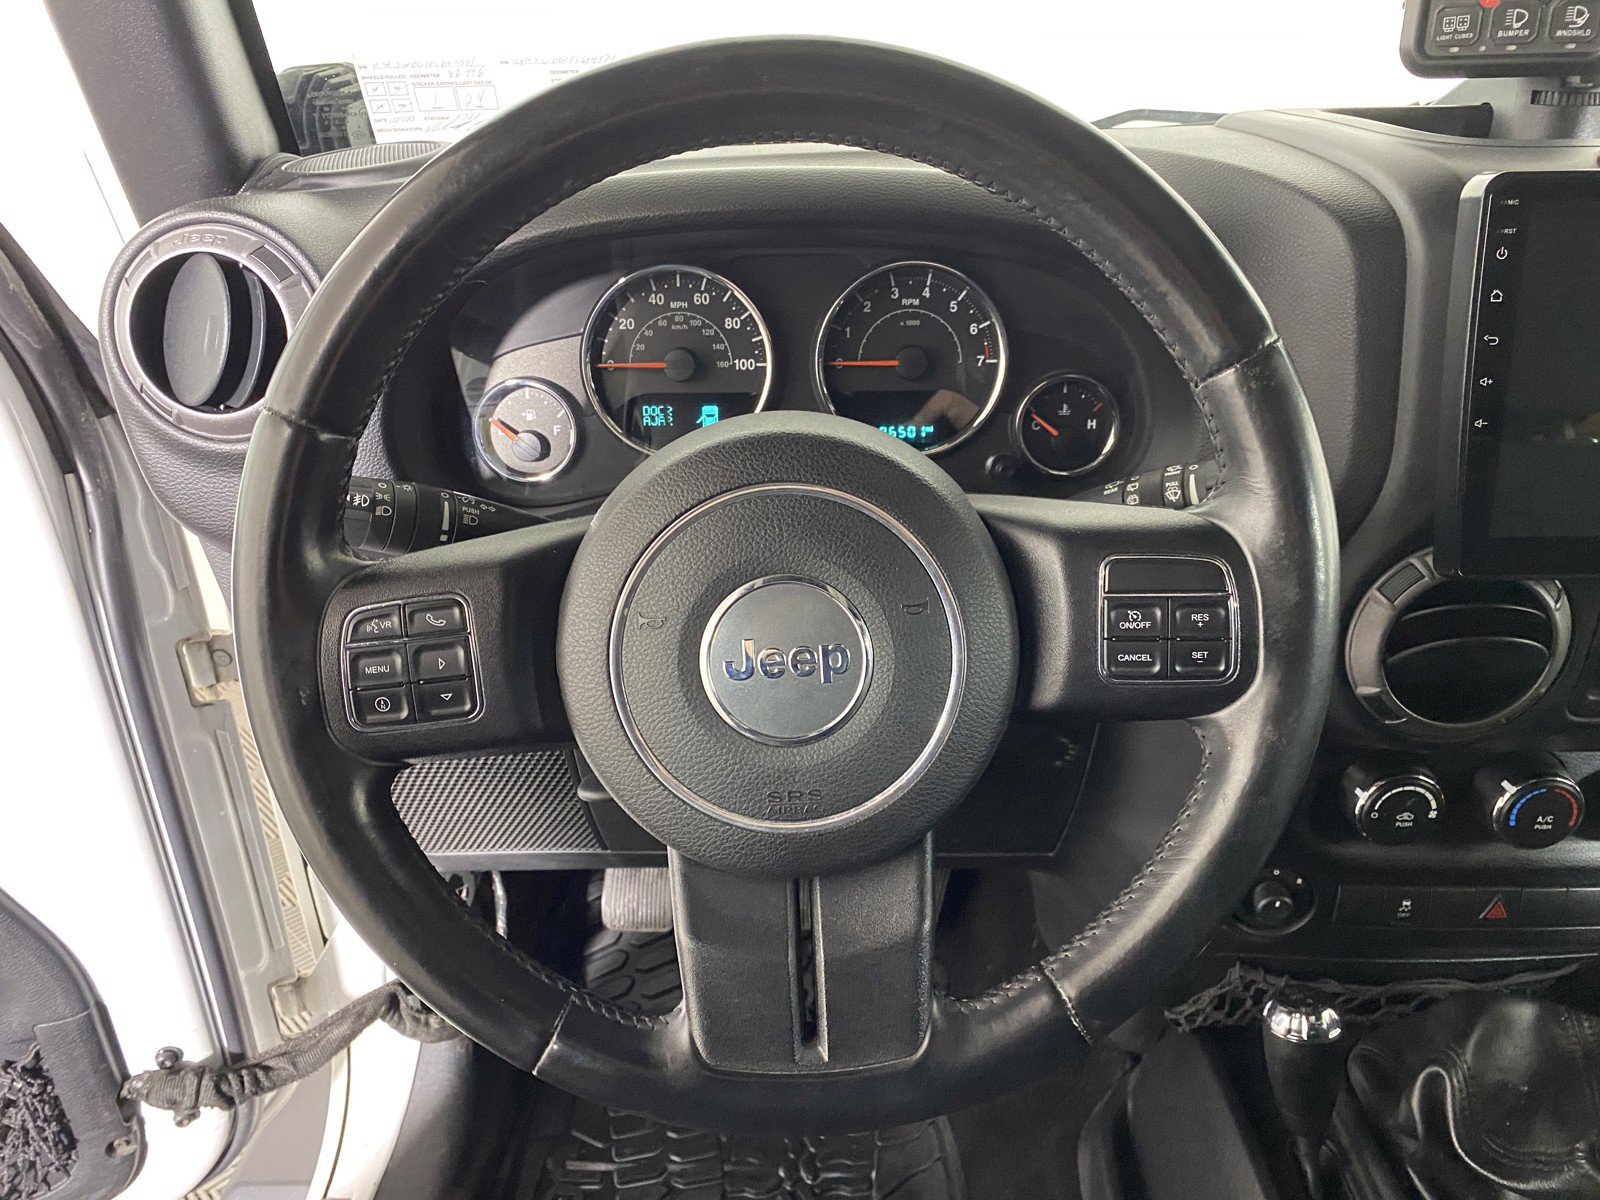 Used 2015 Jeep Wrangler Unlimited For Sale at Fred Beans Hyundai of  Doylestown | VIN: 1C4HJWDG1FL694571